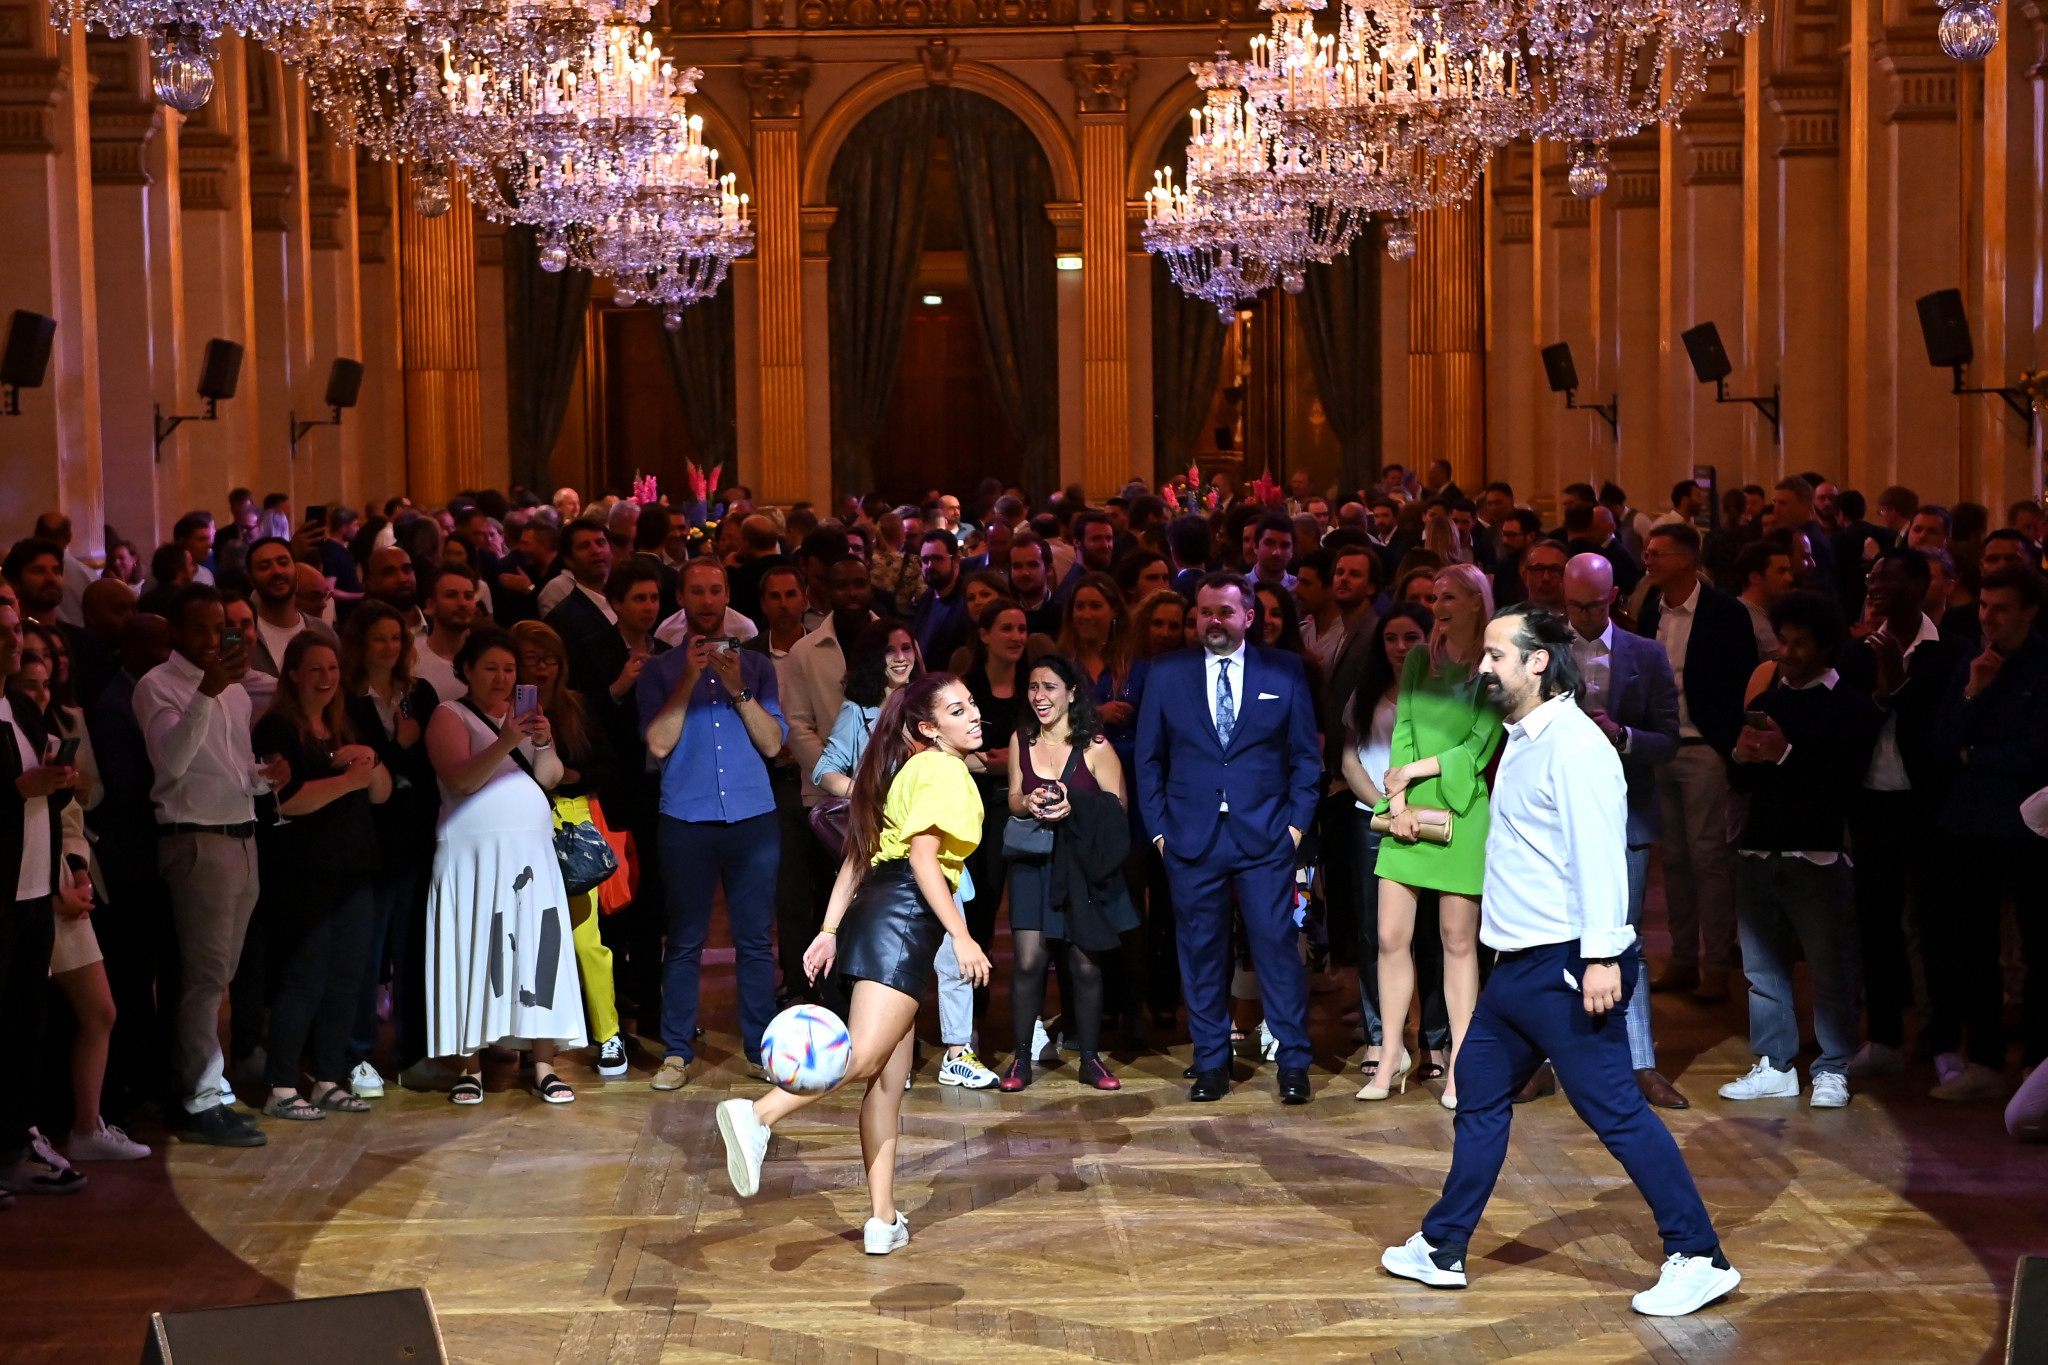 Freestyle footballer Lisa Zimouche showed off her skills in front of guests ©Getty Images